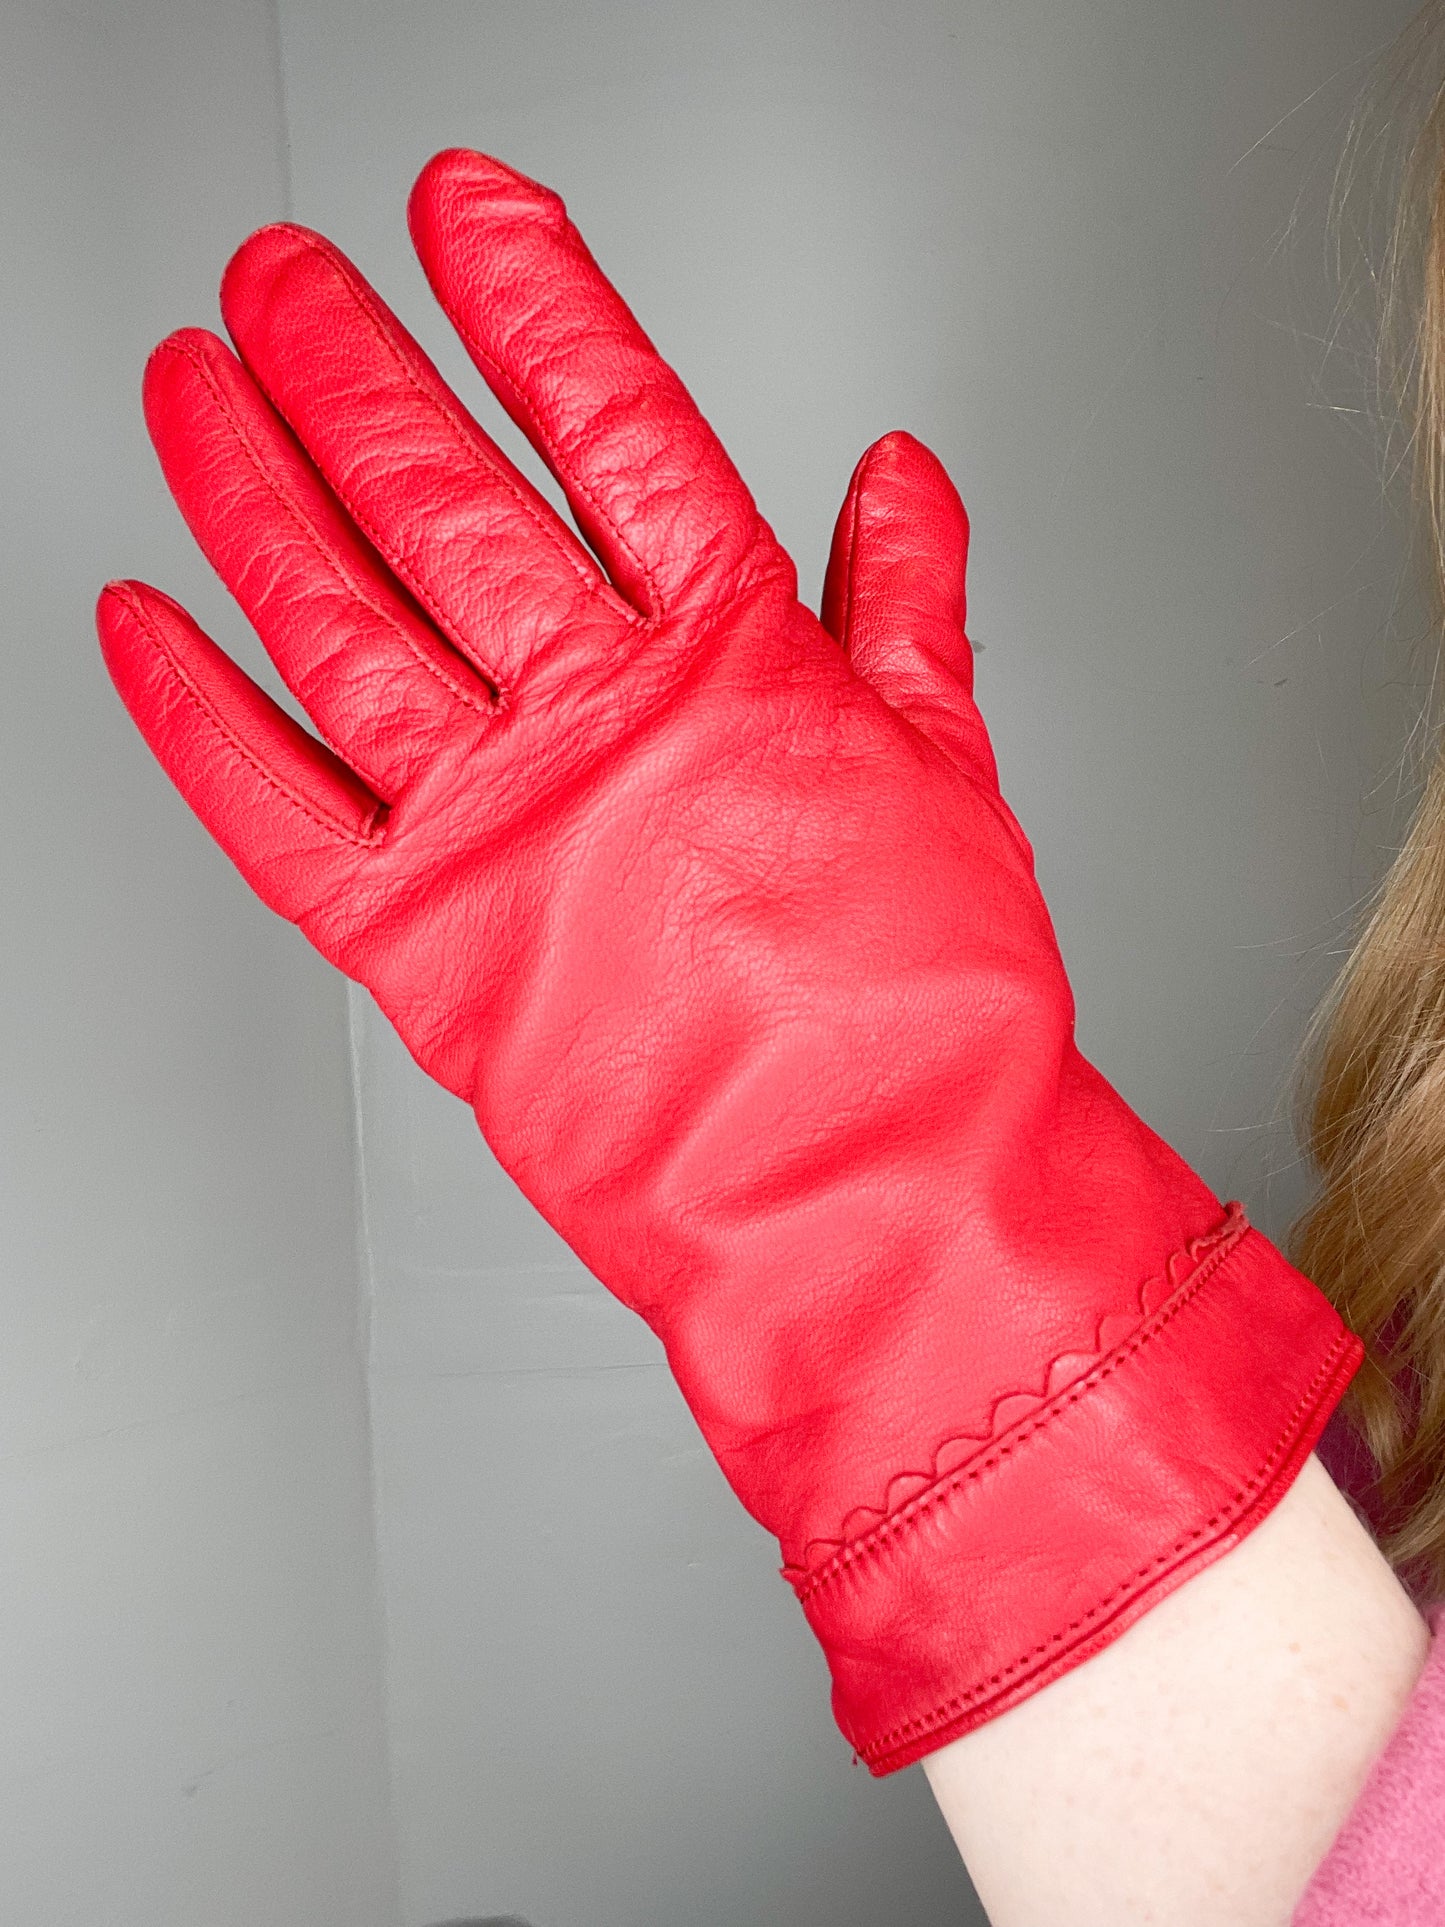 Kenneth Cole Reaction Genuine Red Leather Gloves - Size 7